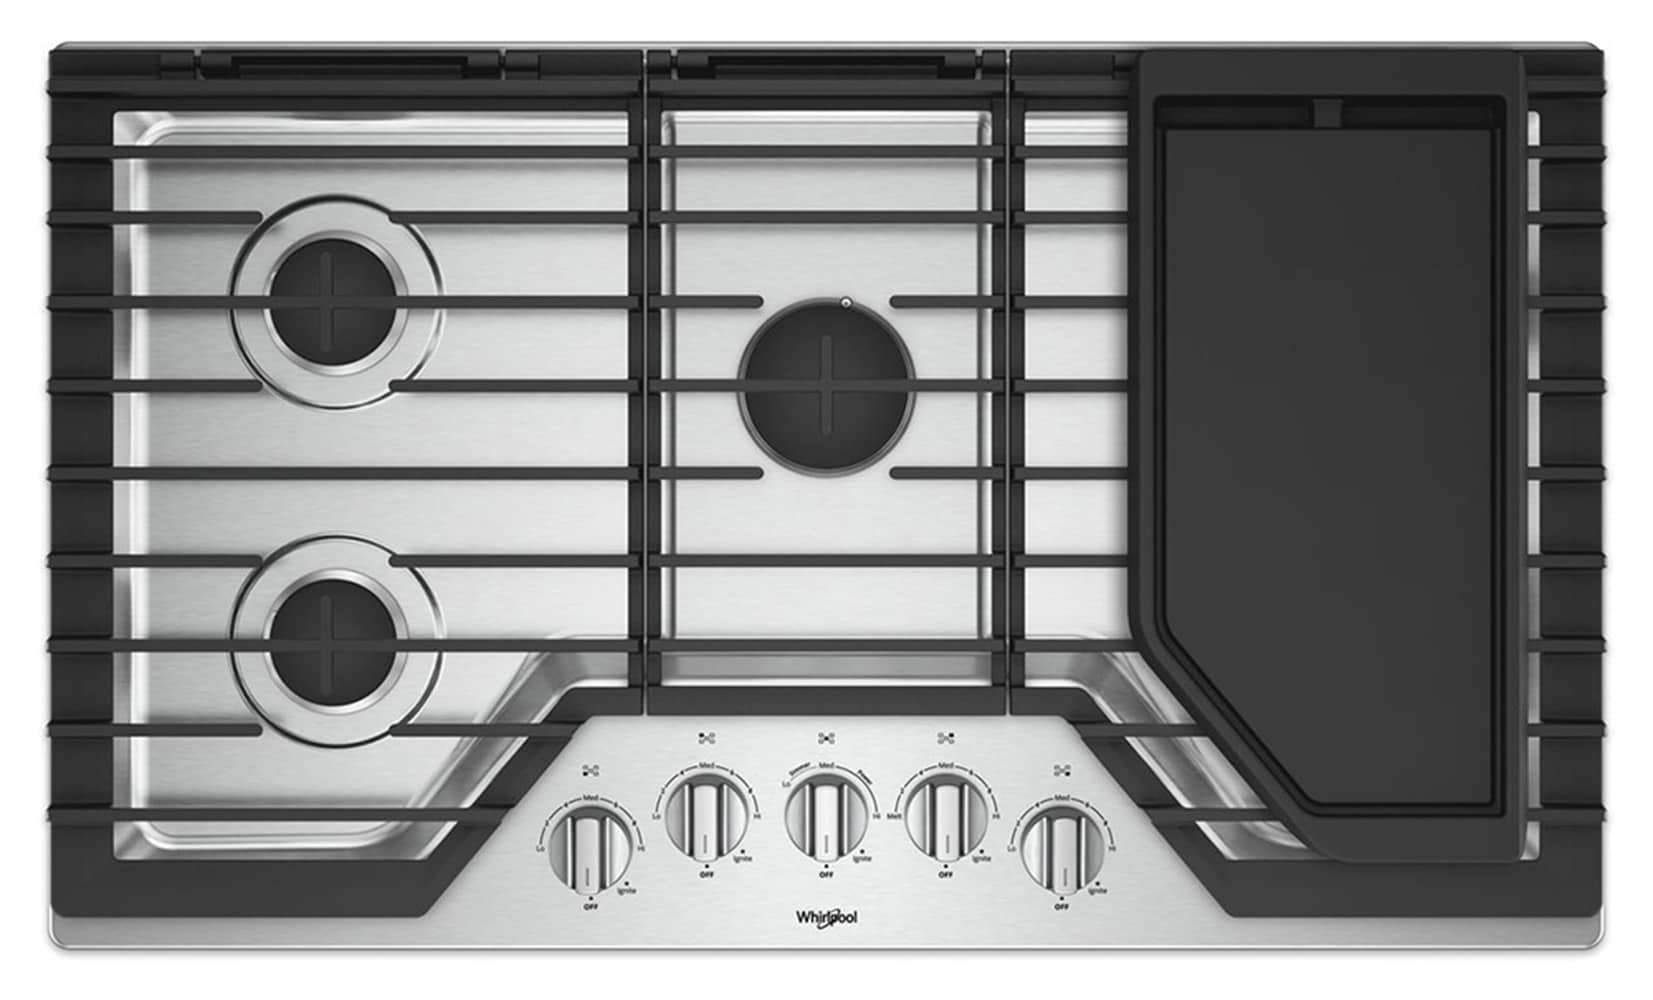 Whirlpool 5-Burner 36-in Gas Cooktop with Griddle and EZ-2-LIFT